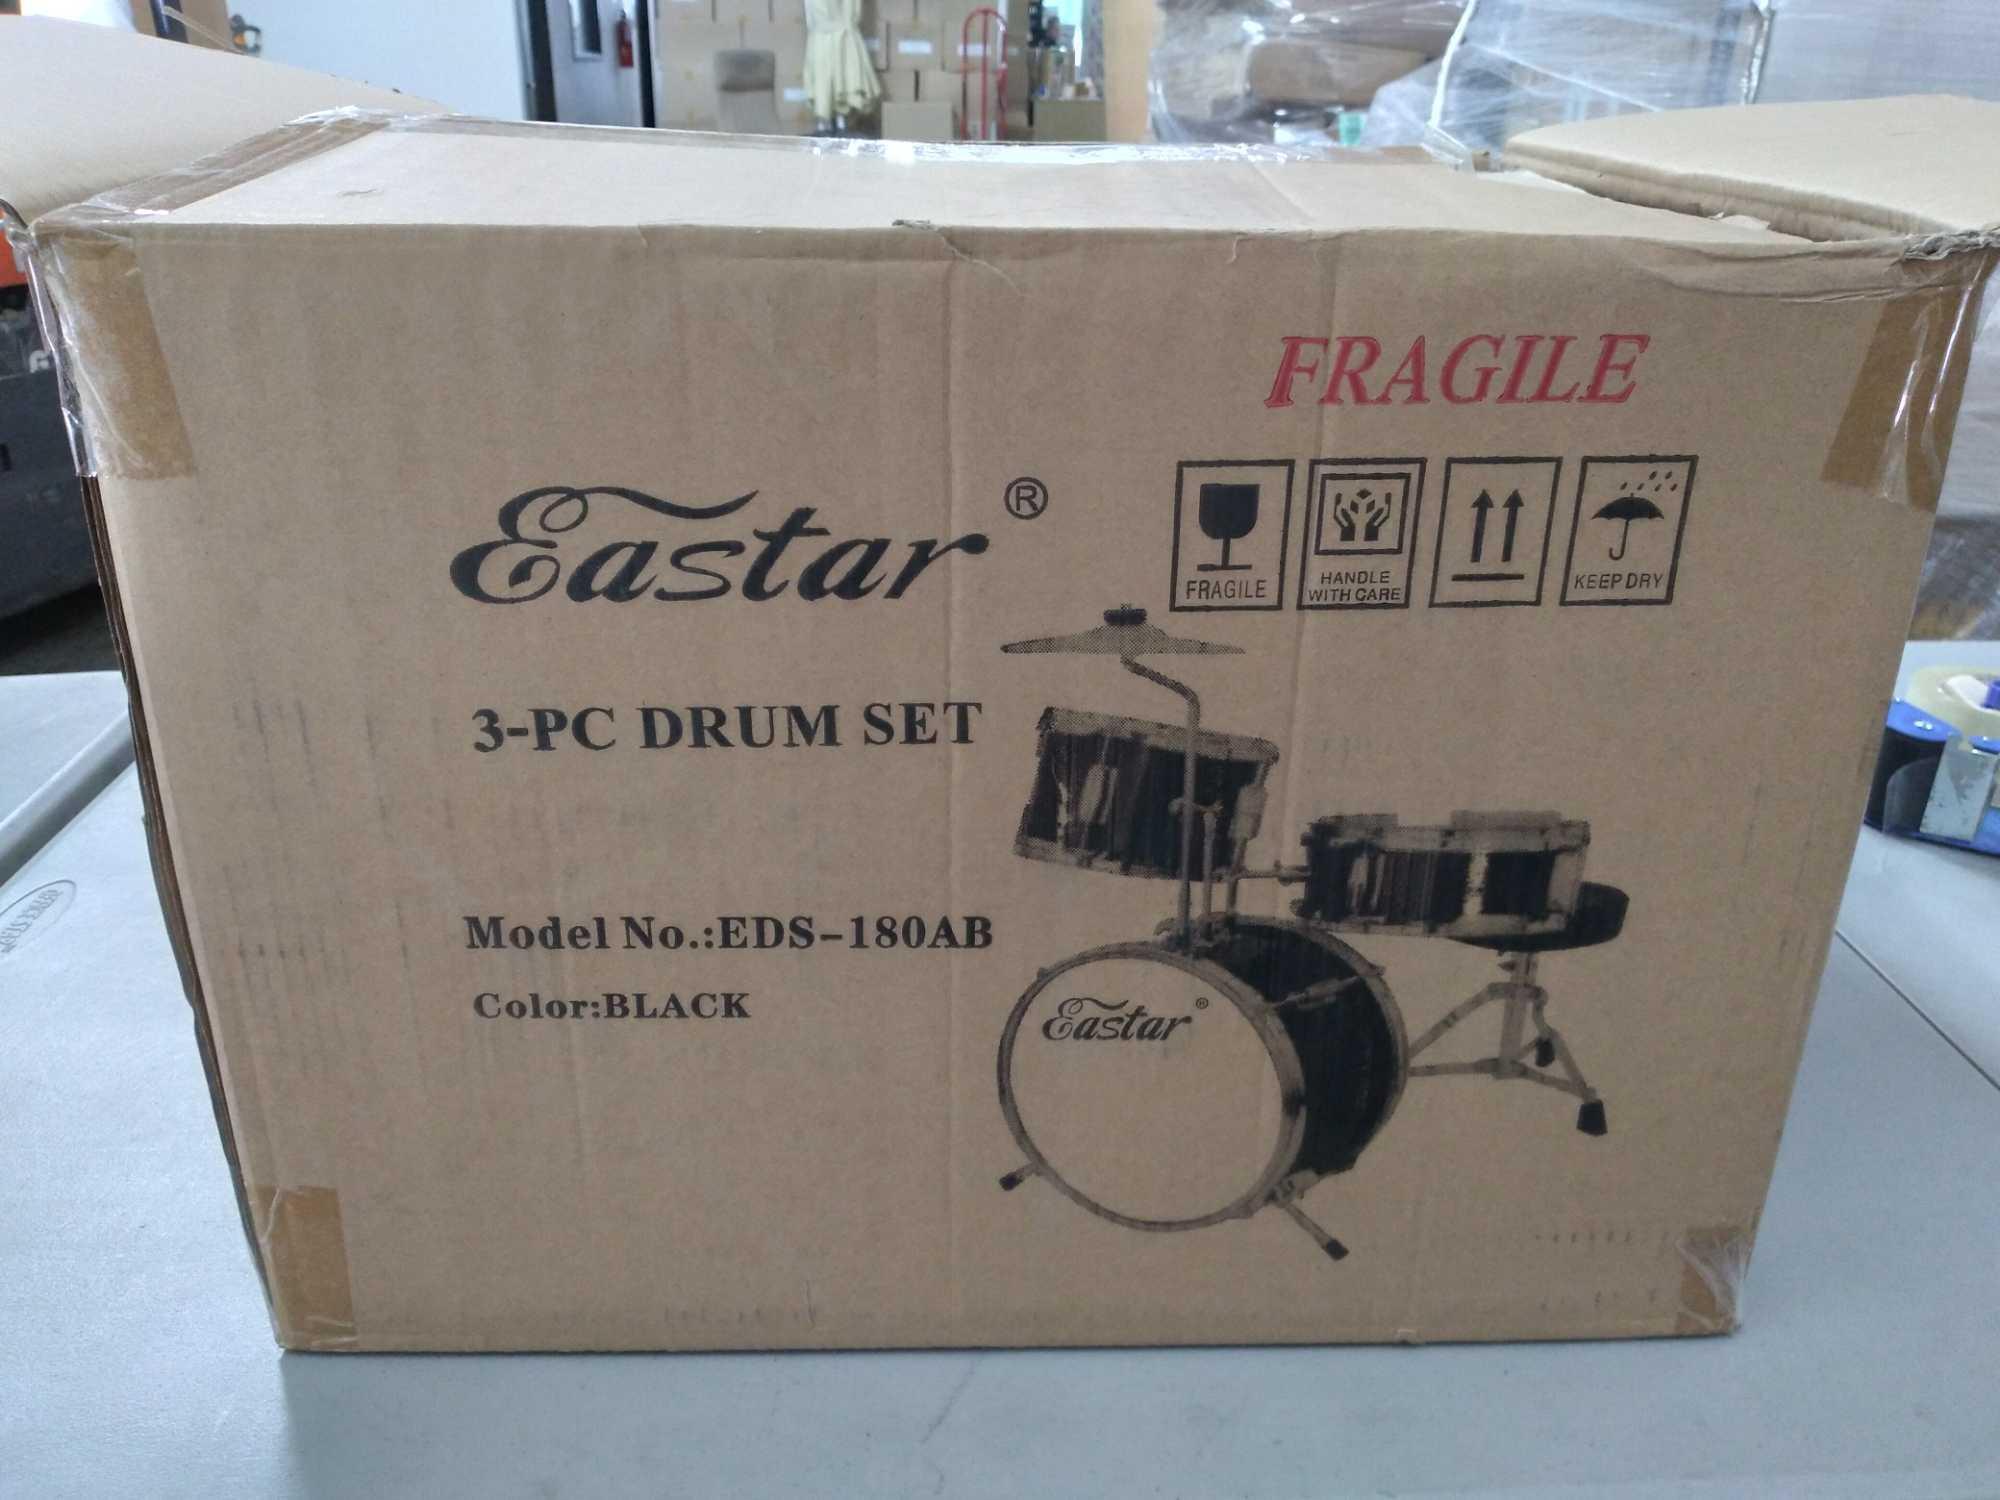 Eastar 14 inch Kids Drum Set Real 3 Pieces with Throne, Cymbal, Pedal and Drumsticks $86.99 MSRP